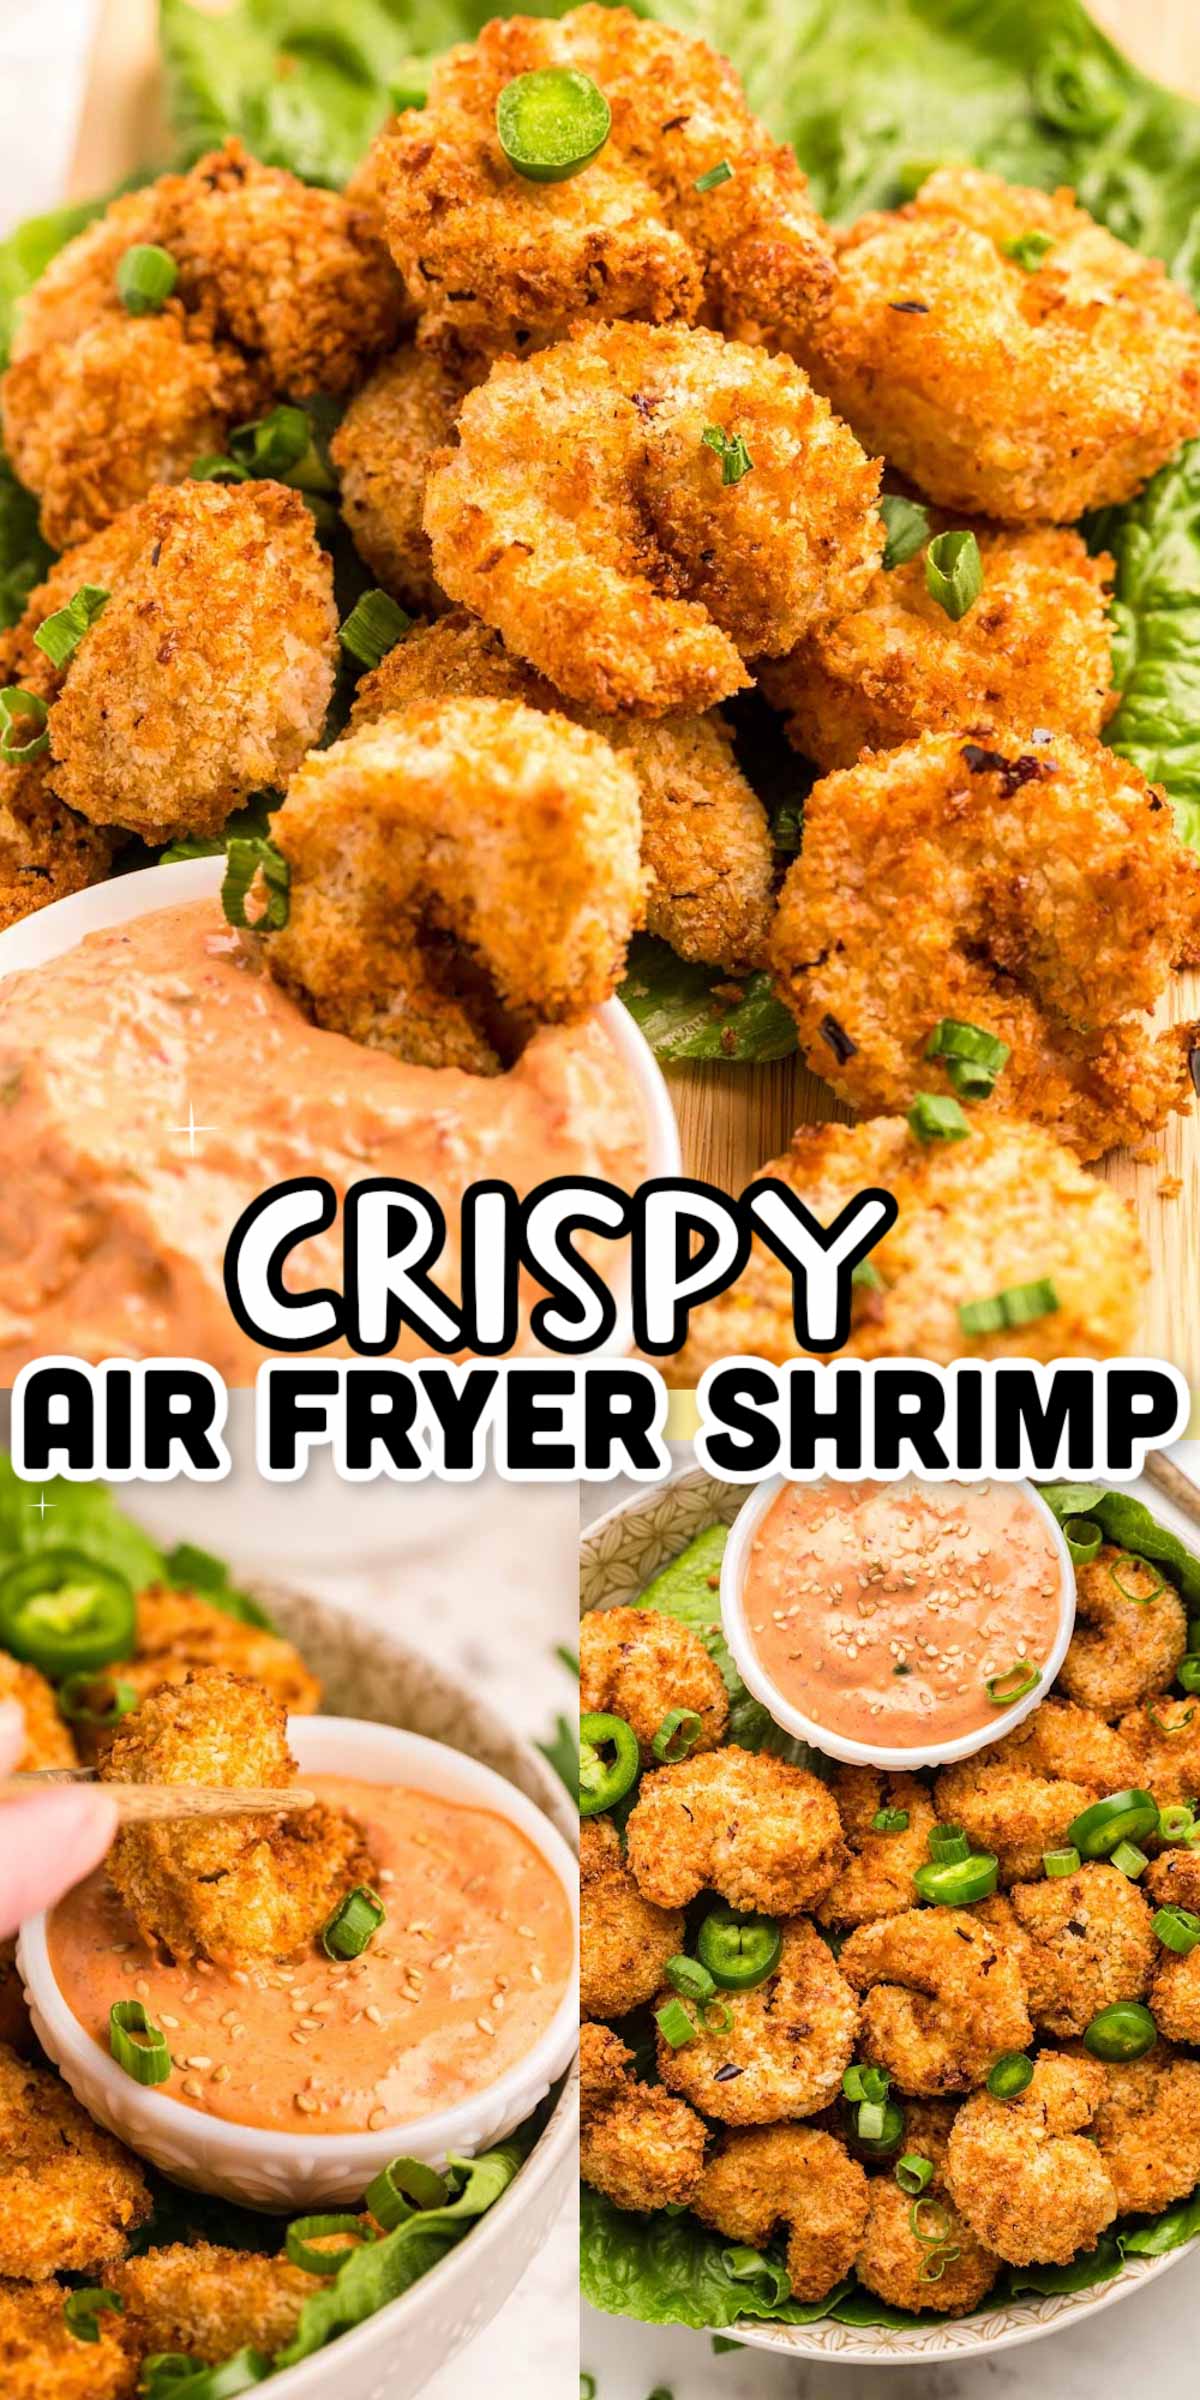 This Crispy Air Fryer Shrimp is golden brown and packed with a kick of heat from the breading to the jalapeno cream chili dipping sauce! via @sugarandsoulco